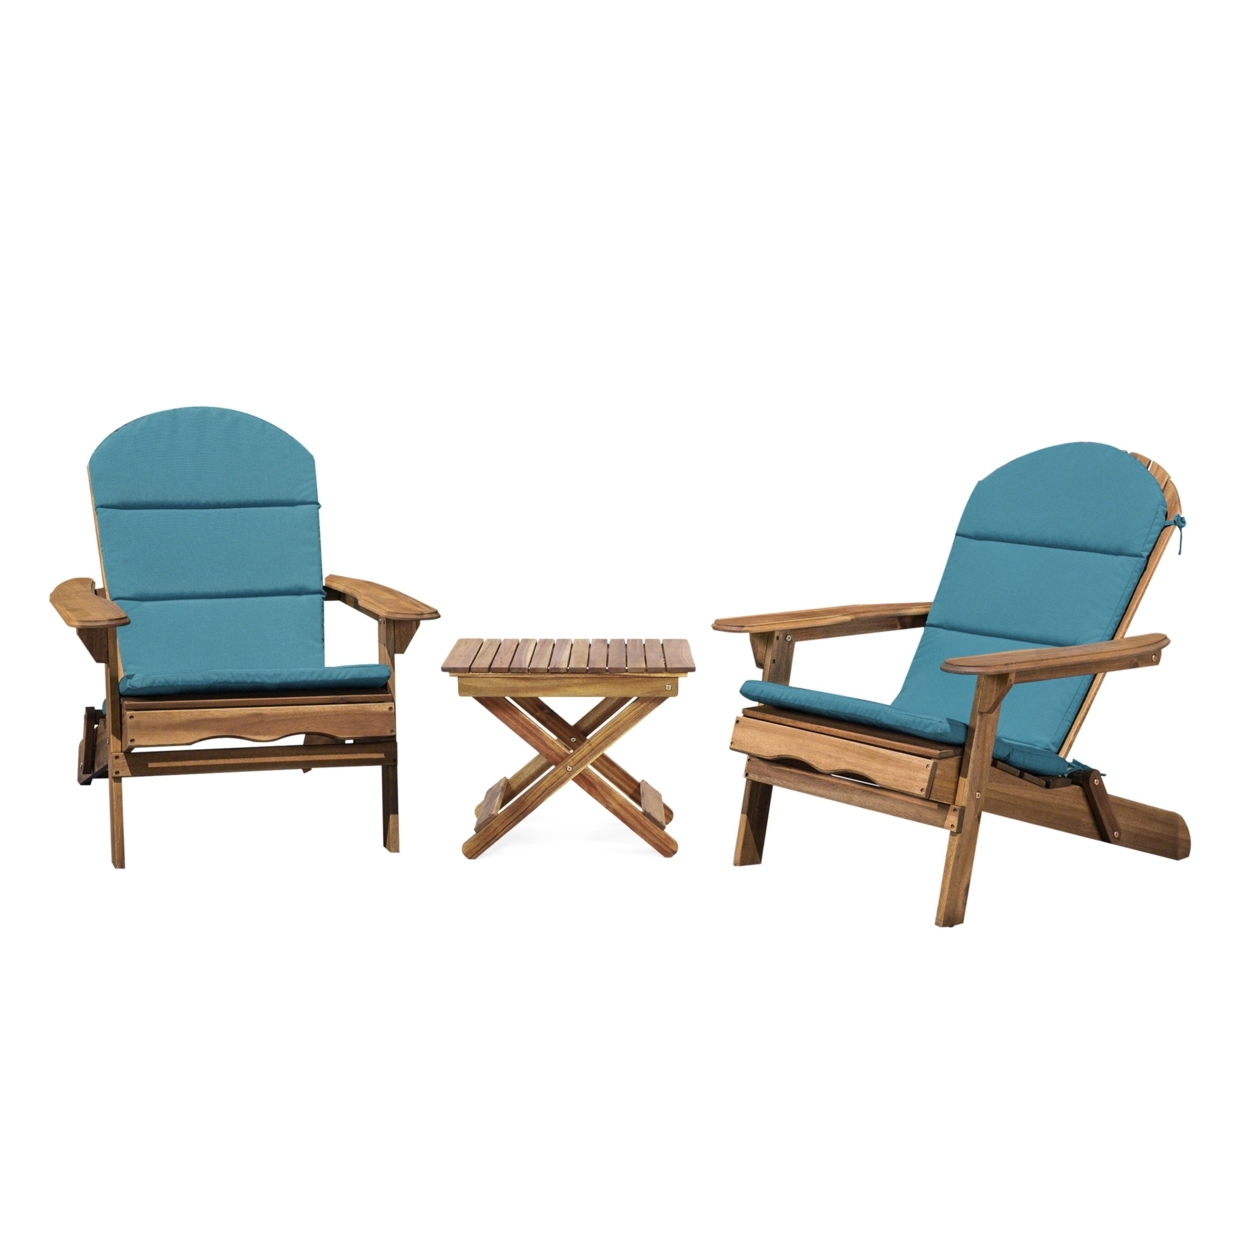 Reed Outdoor 2 Seater Acacia Wood Chat Set With Water Resistant Cushions - Dark Gray/khaki